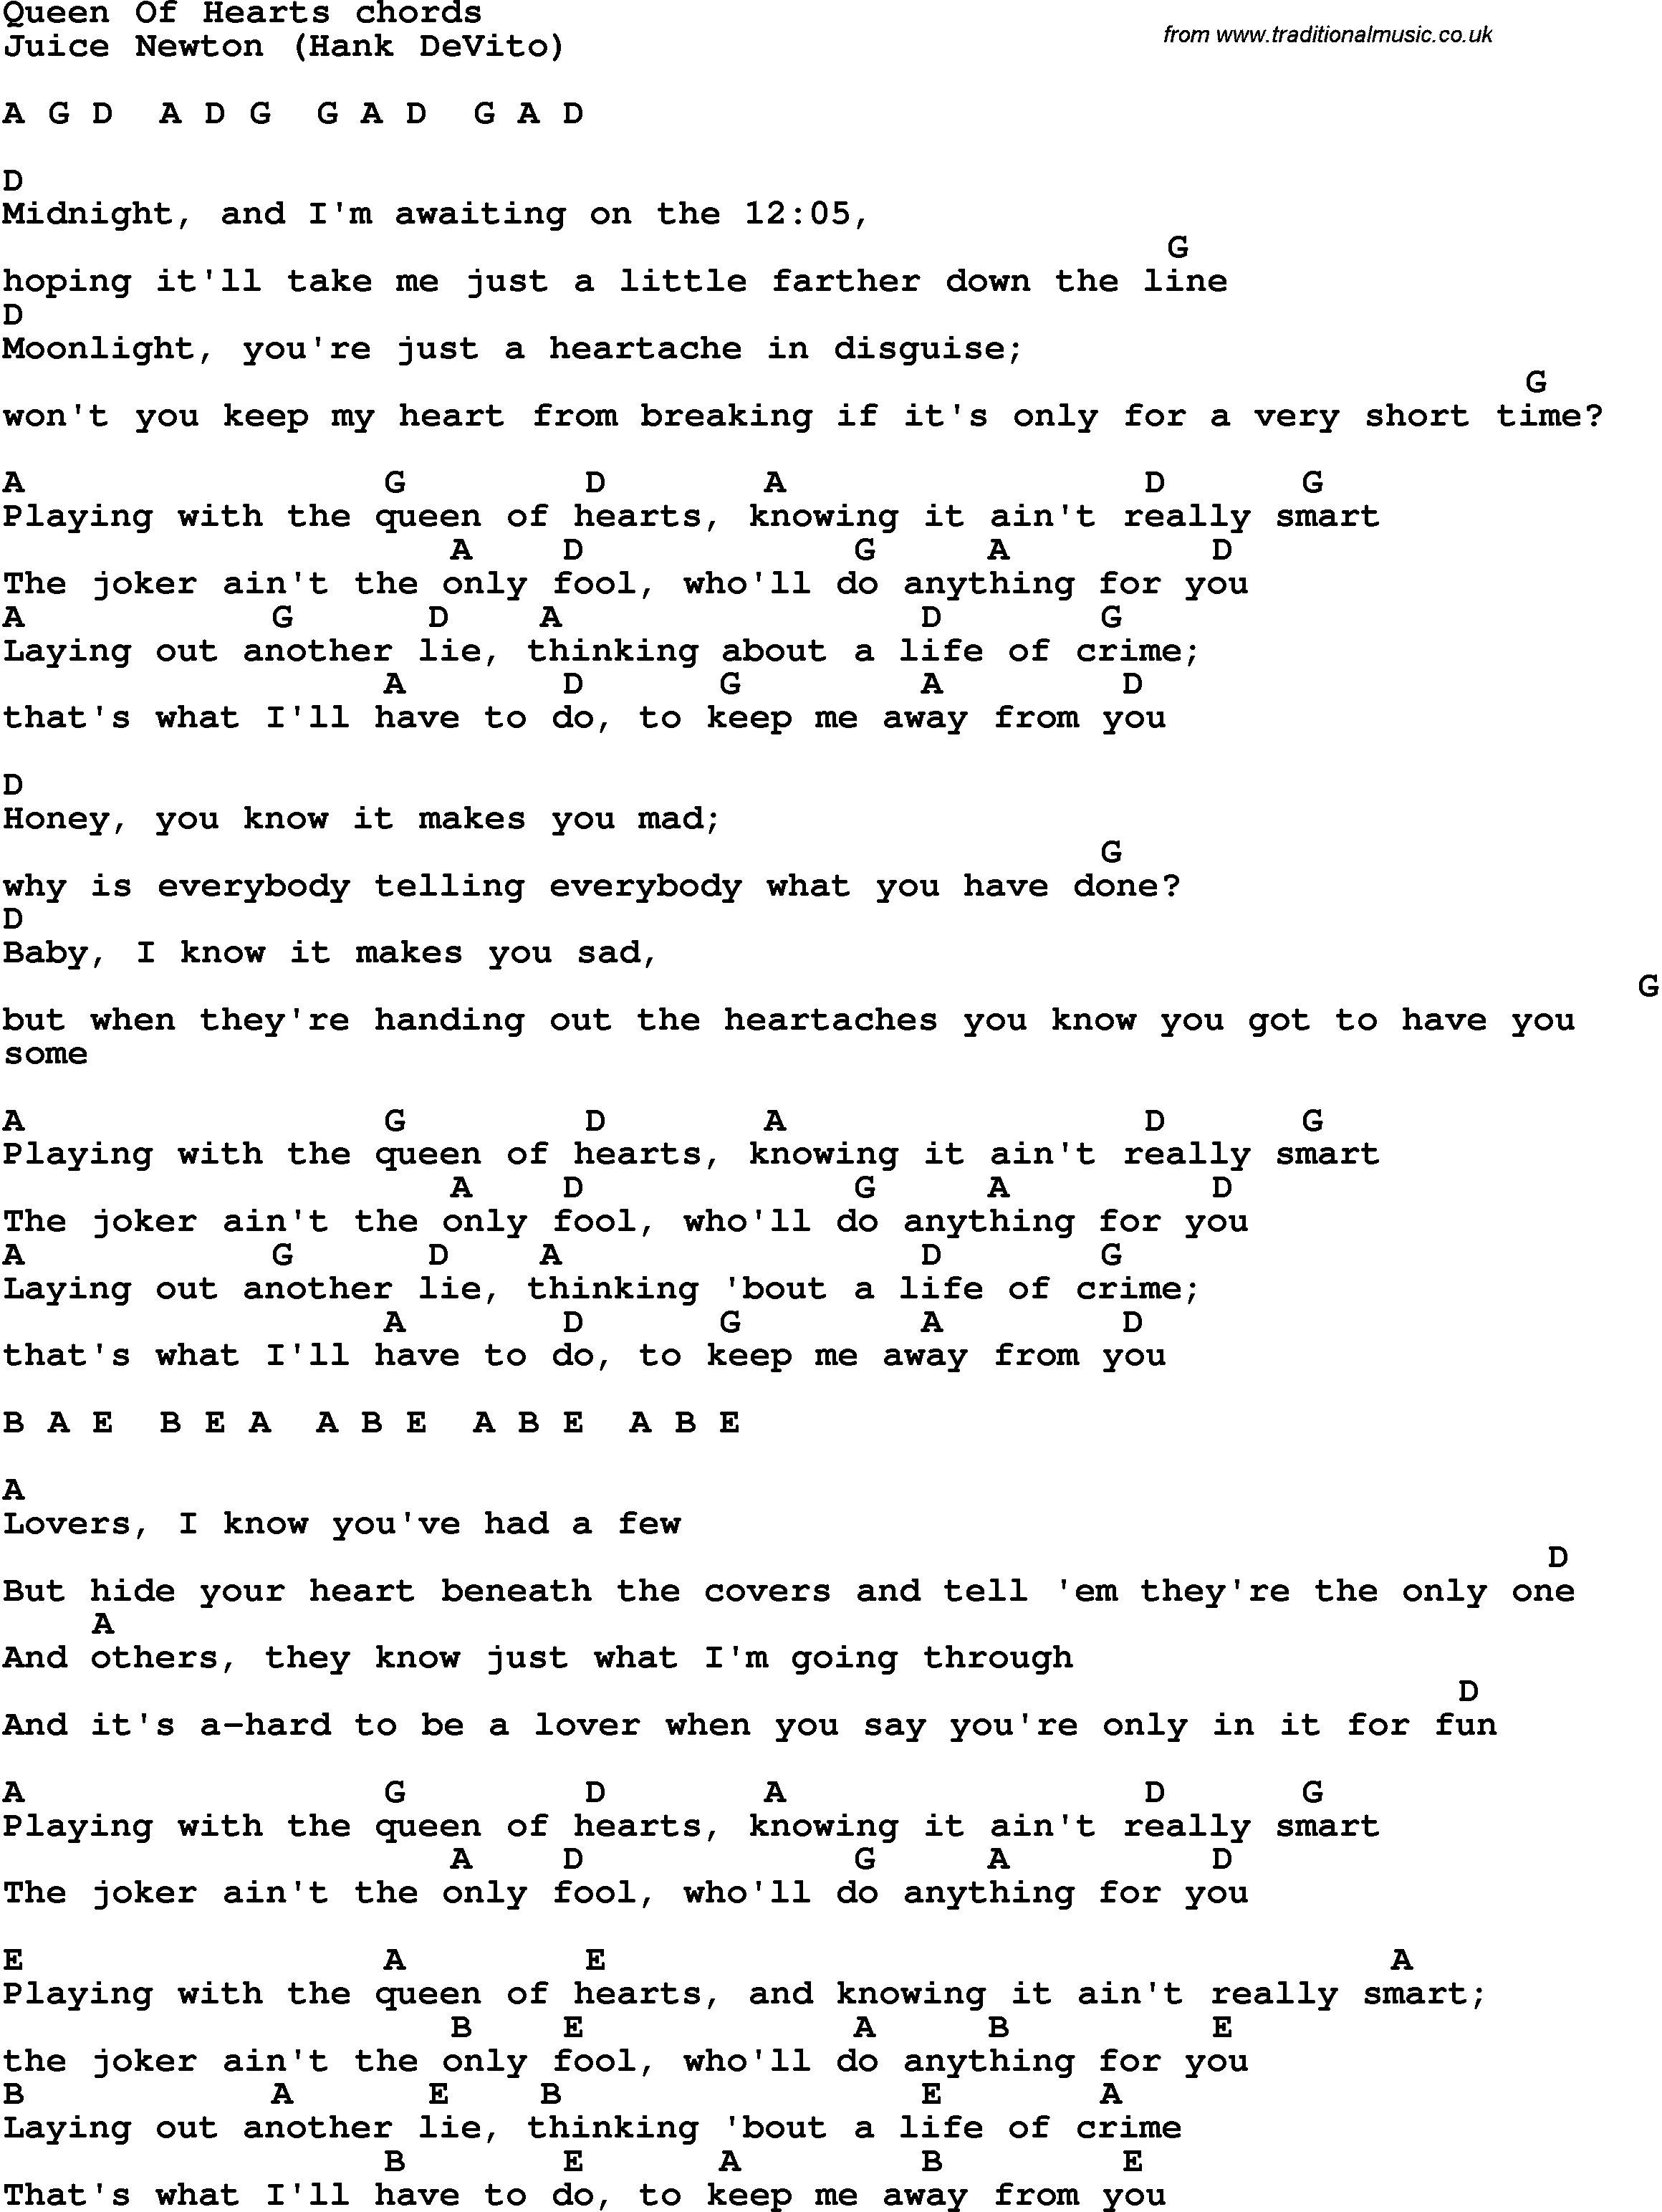 Jar Of Hearts Chords Song Lyrics With Guitar Chords For Queen Of Hearts